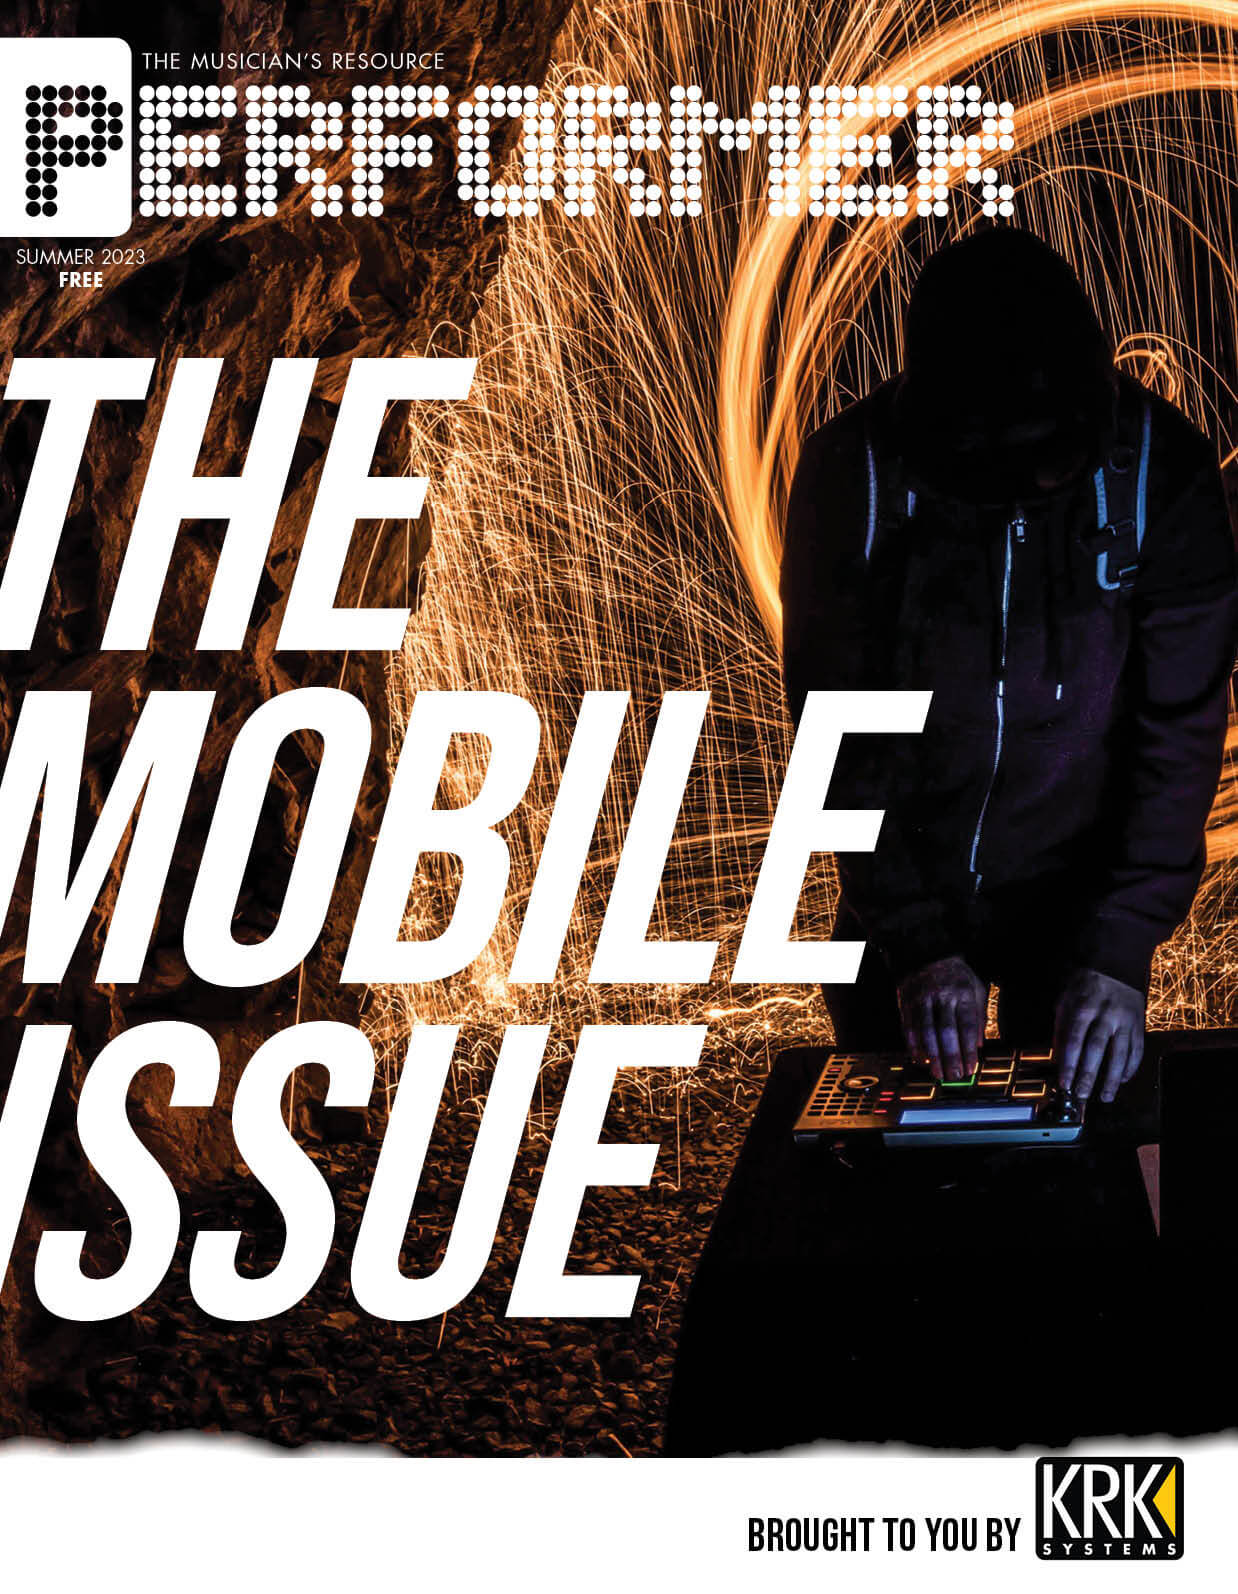 The MOBILE ISSUE is out now!